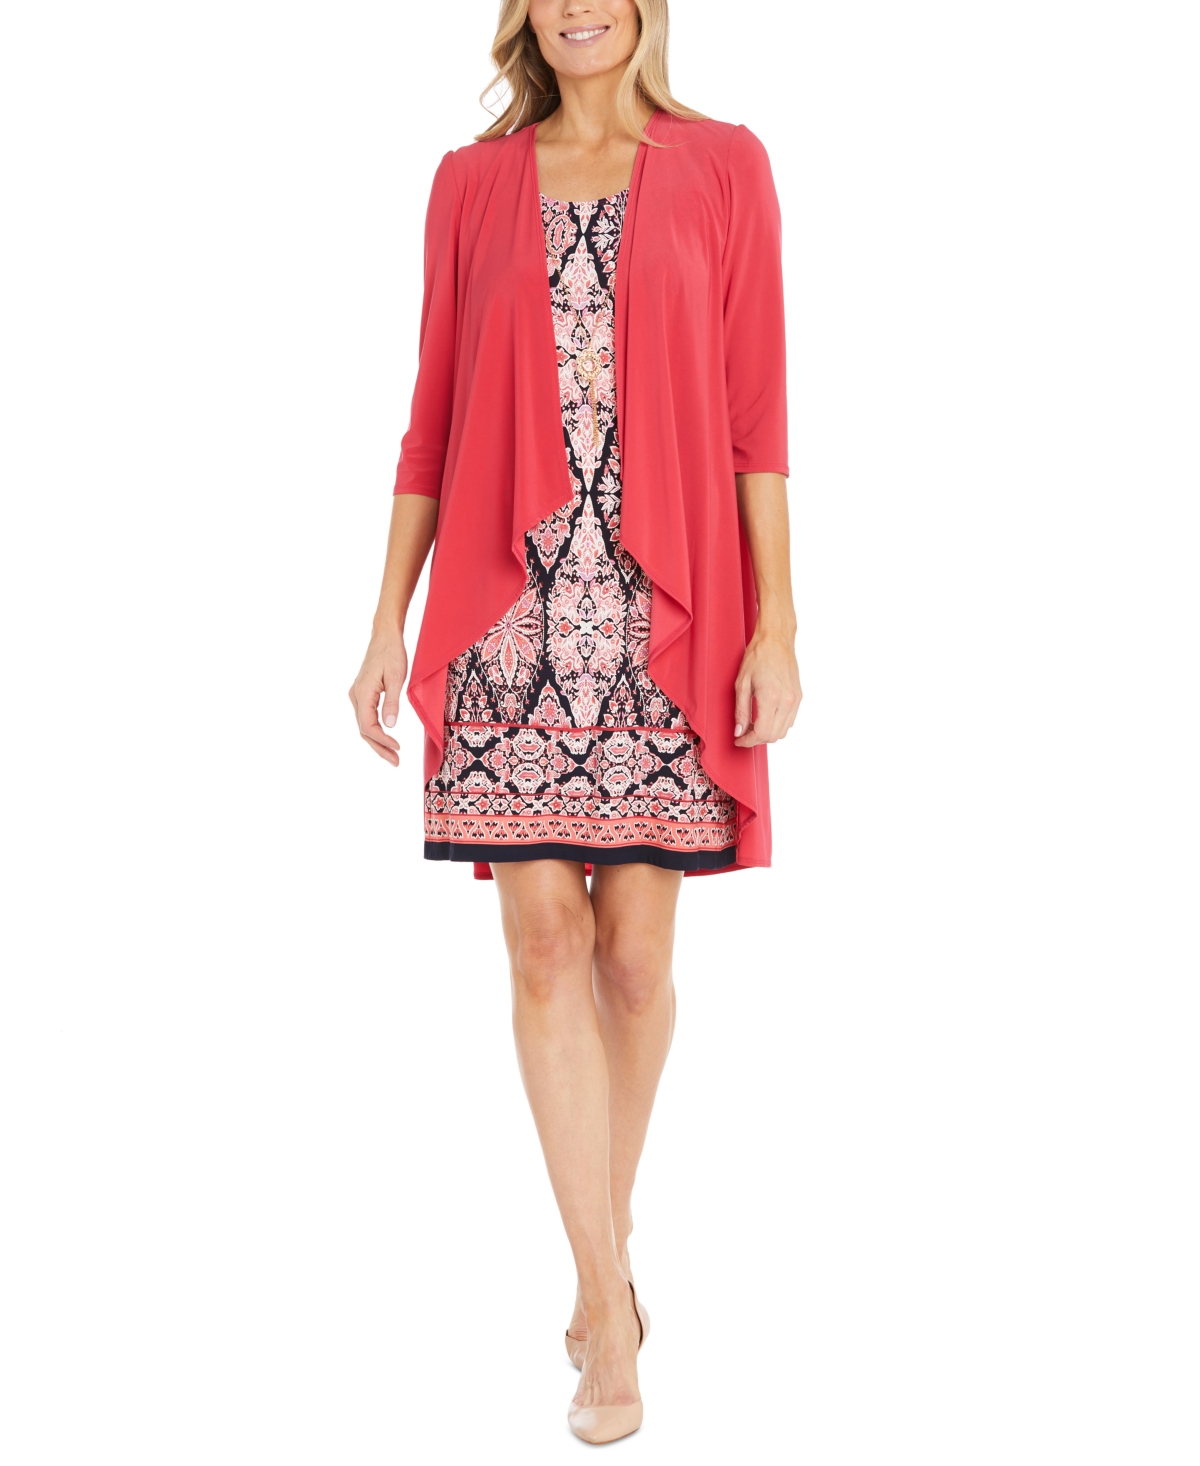 R & M Richards Women's 2-pc. Jacket & Necklace Dress In Coral